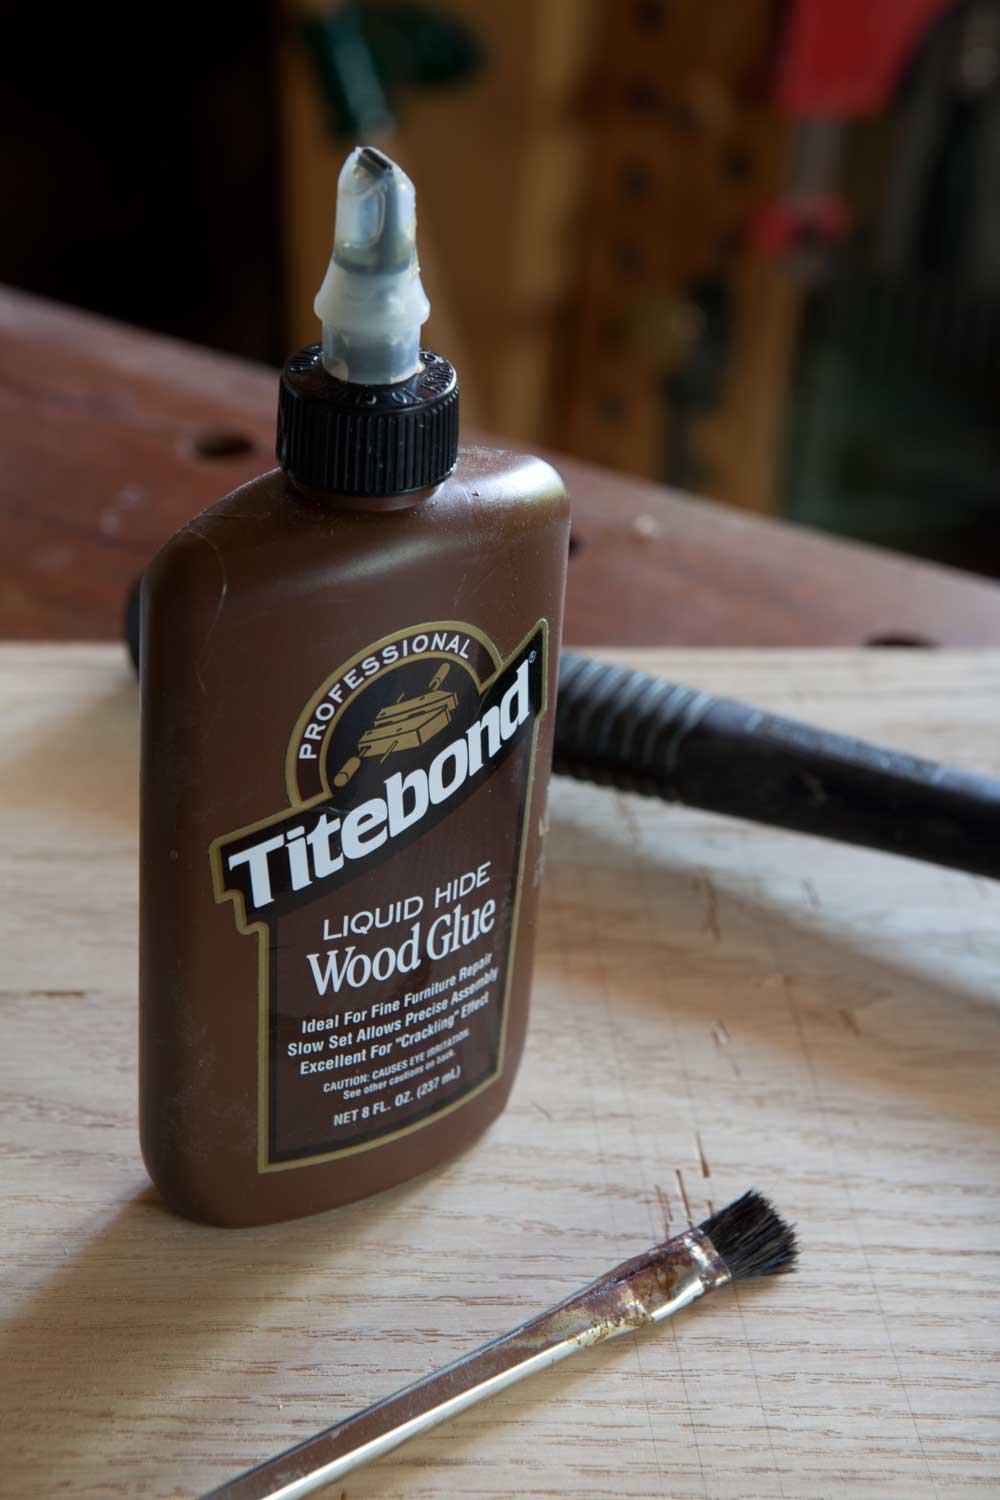 Good wood glue for woodworking